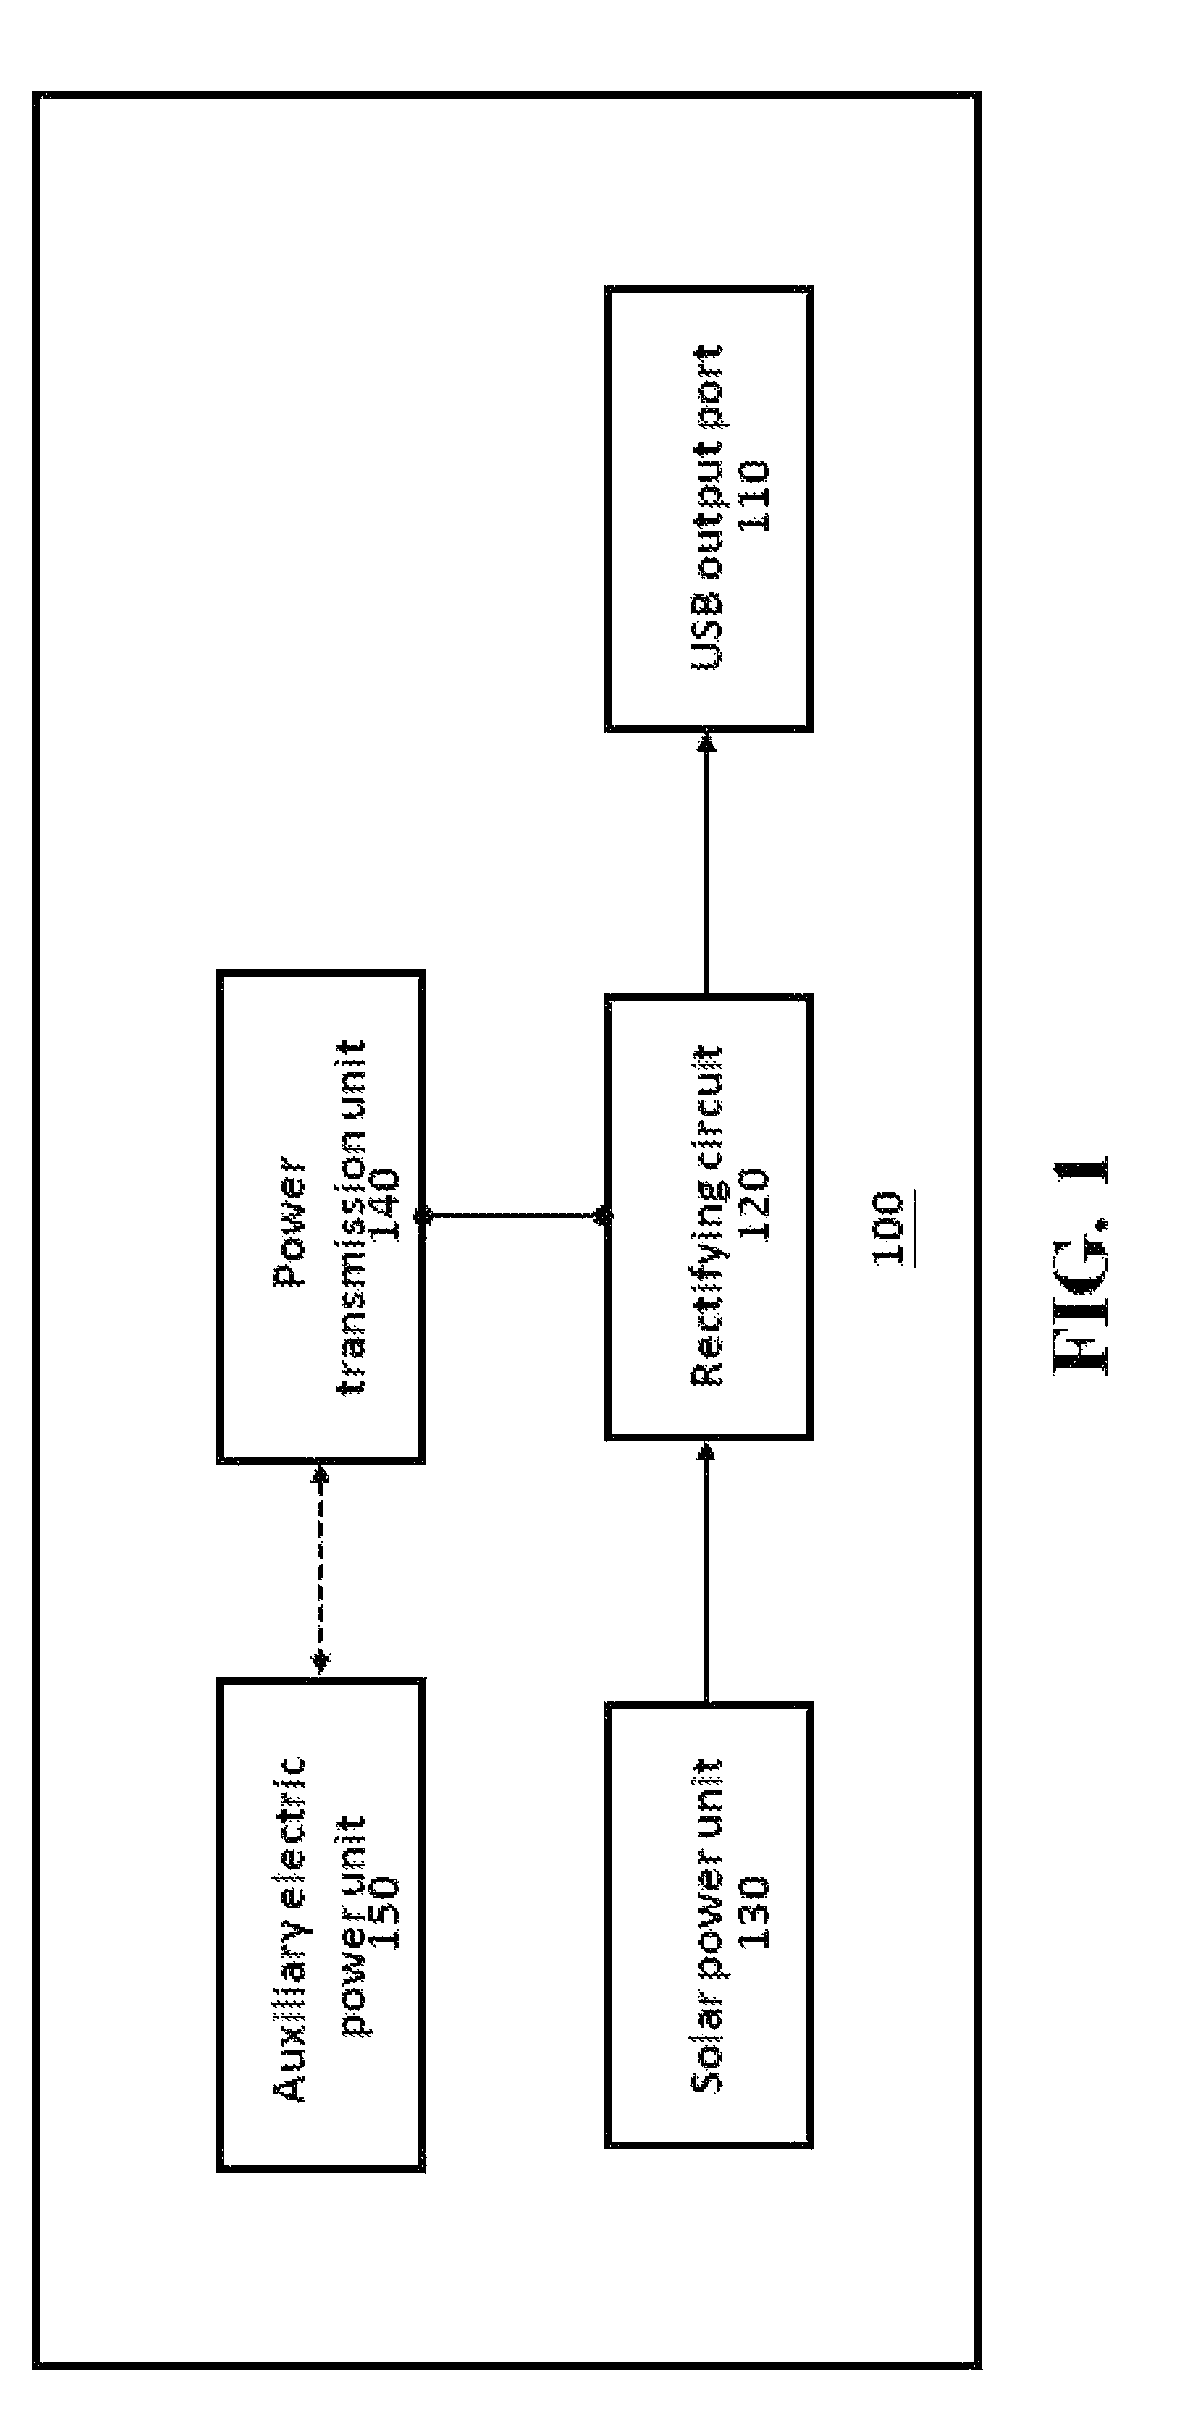 Multi power supply system for a portable device